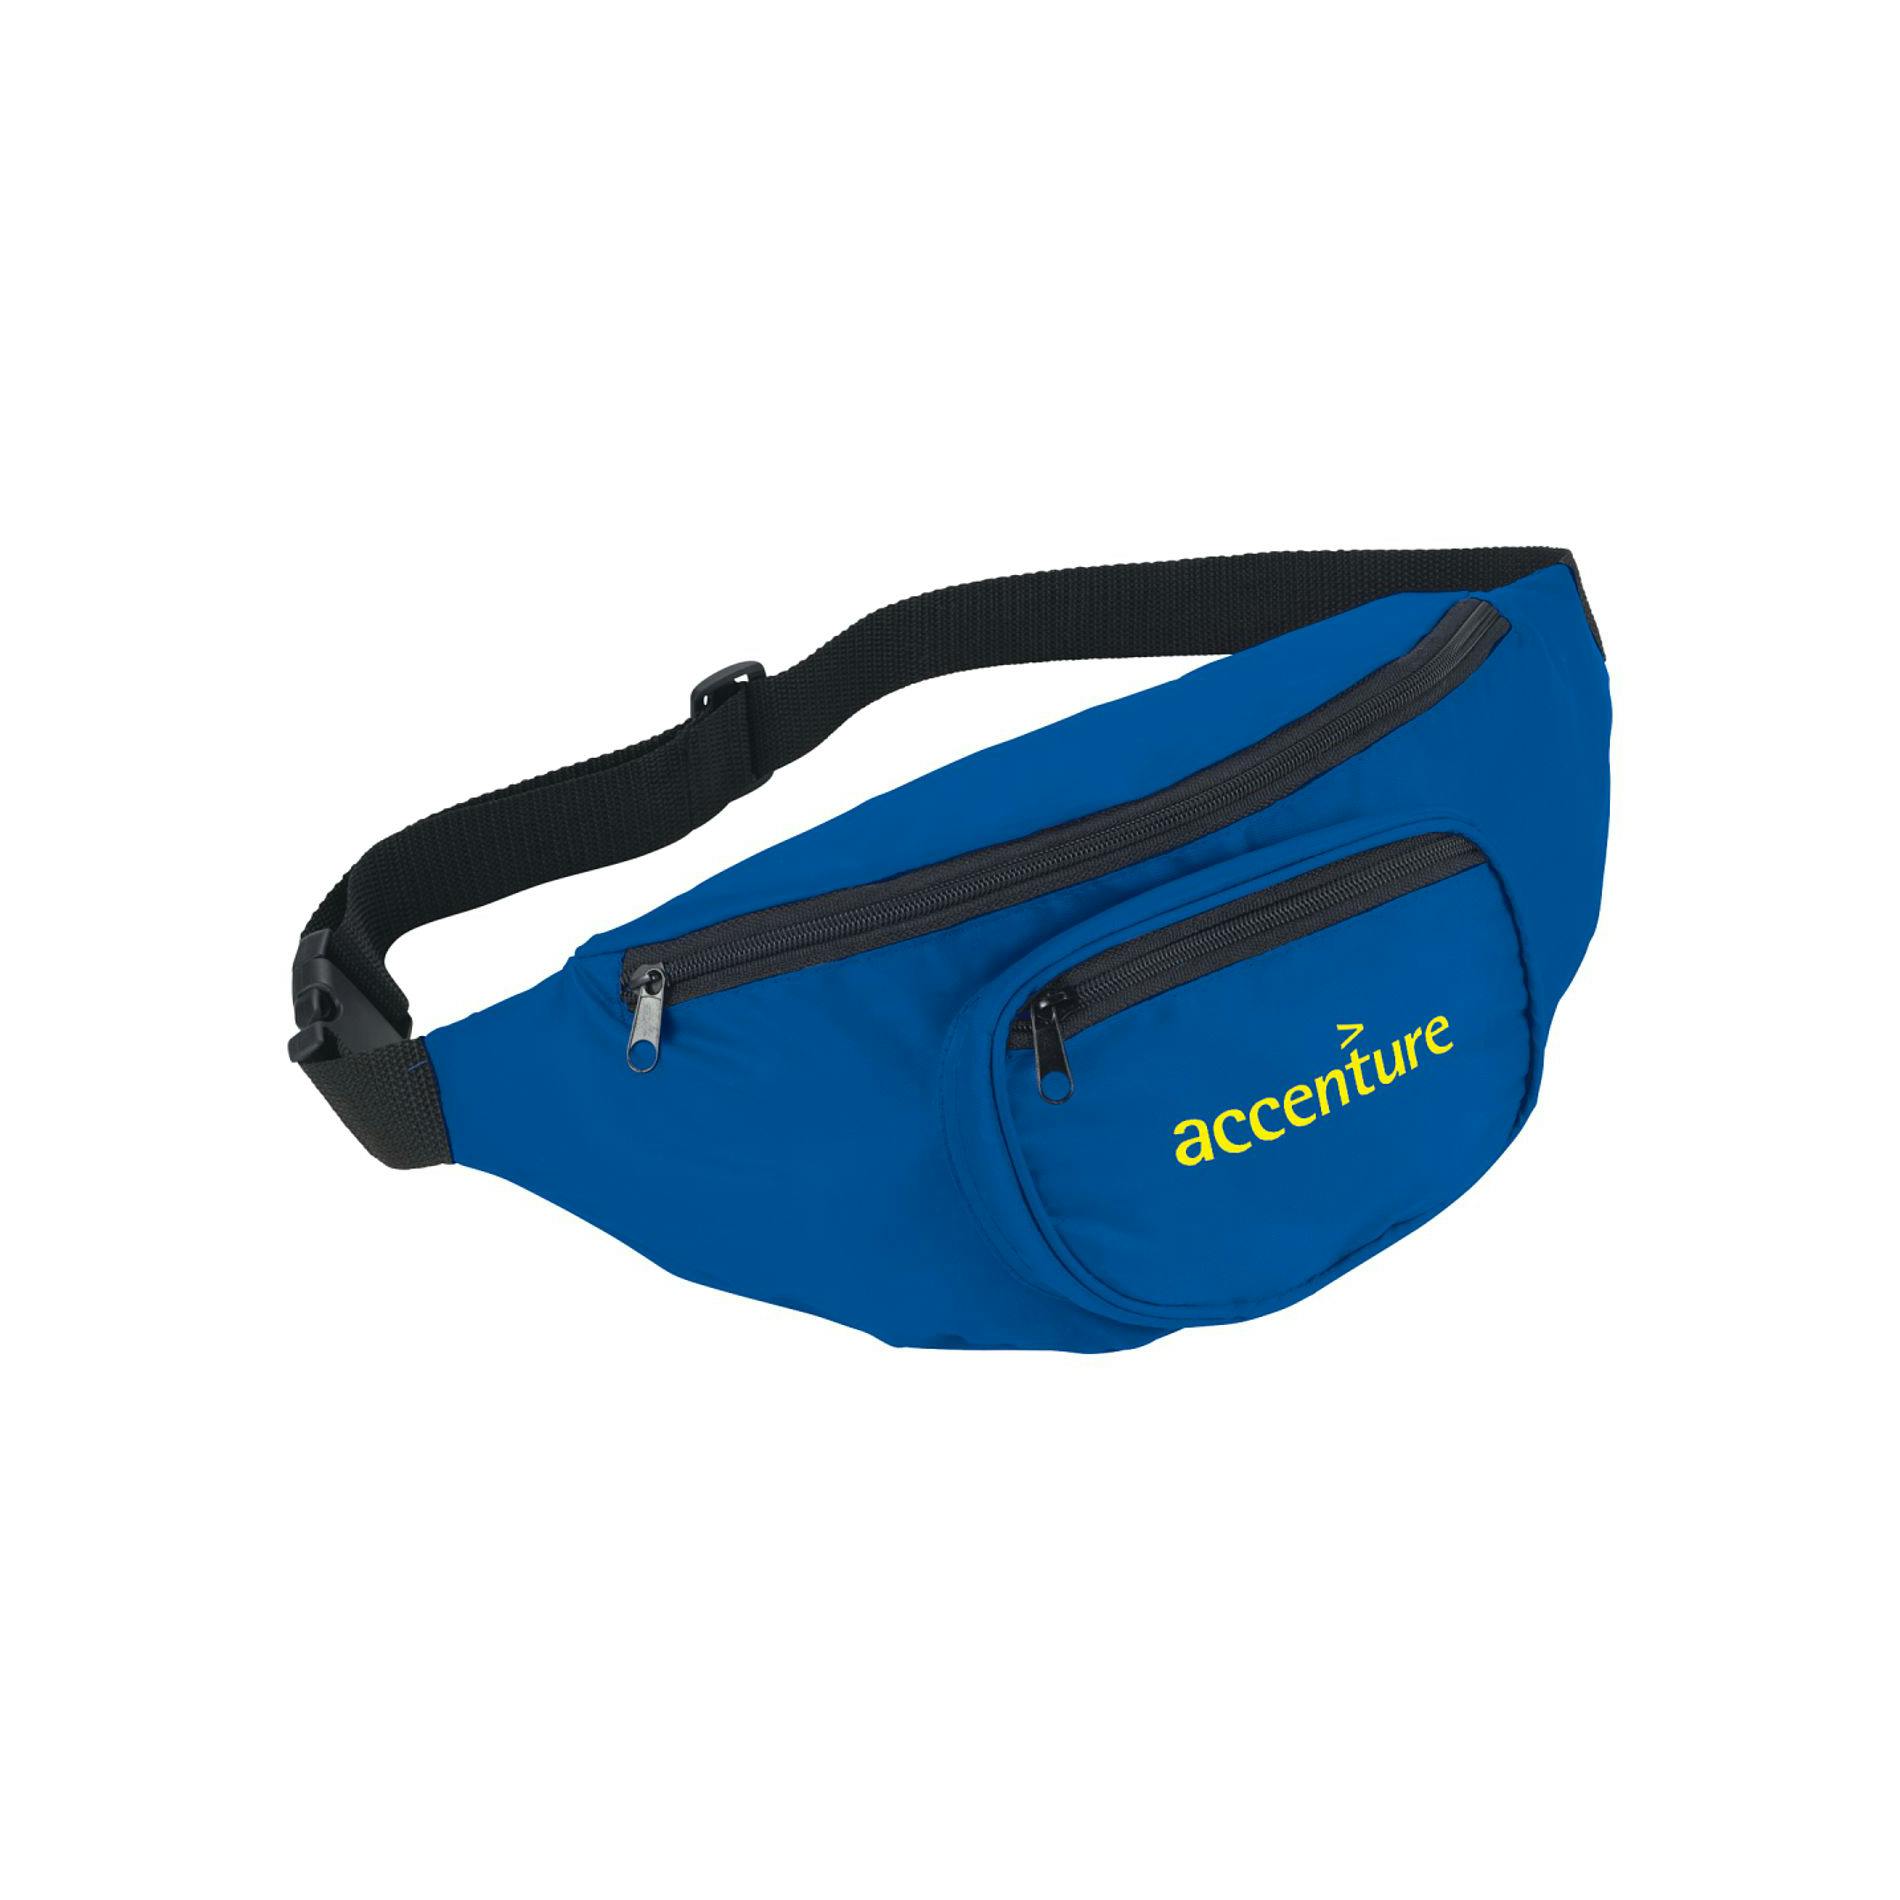 Hipster Deluxe Fanny Pack - additional Image 2